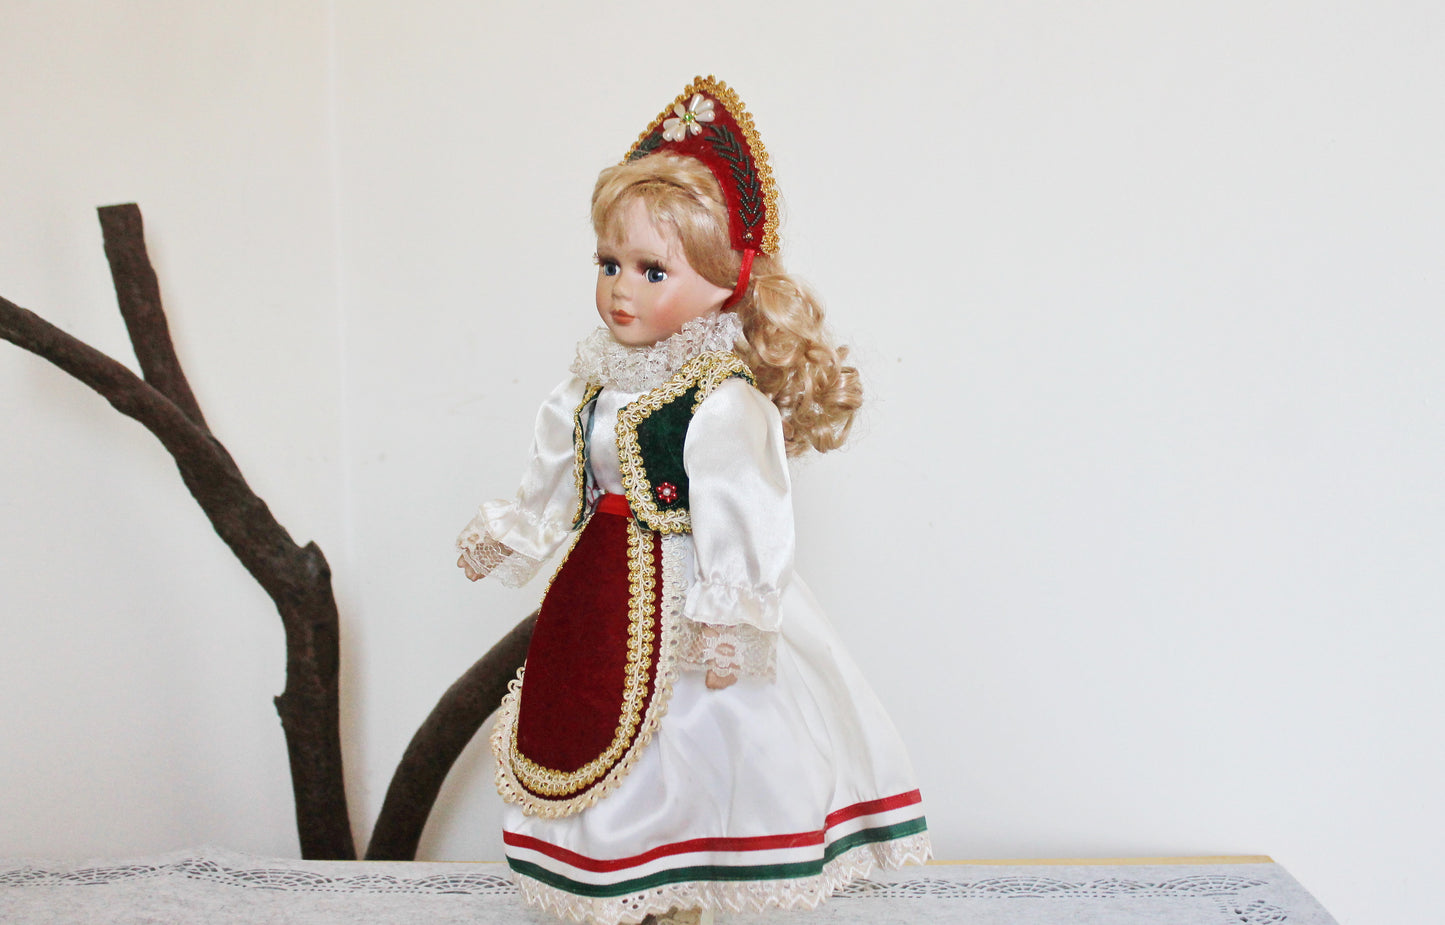 Vintage porcelain Germany cute doll on a stand in Hungarian clothing - 18 inches - Collectible doll - 1970-1980s